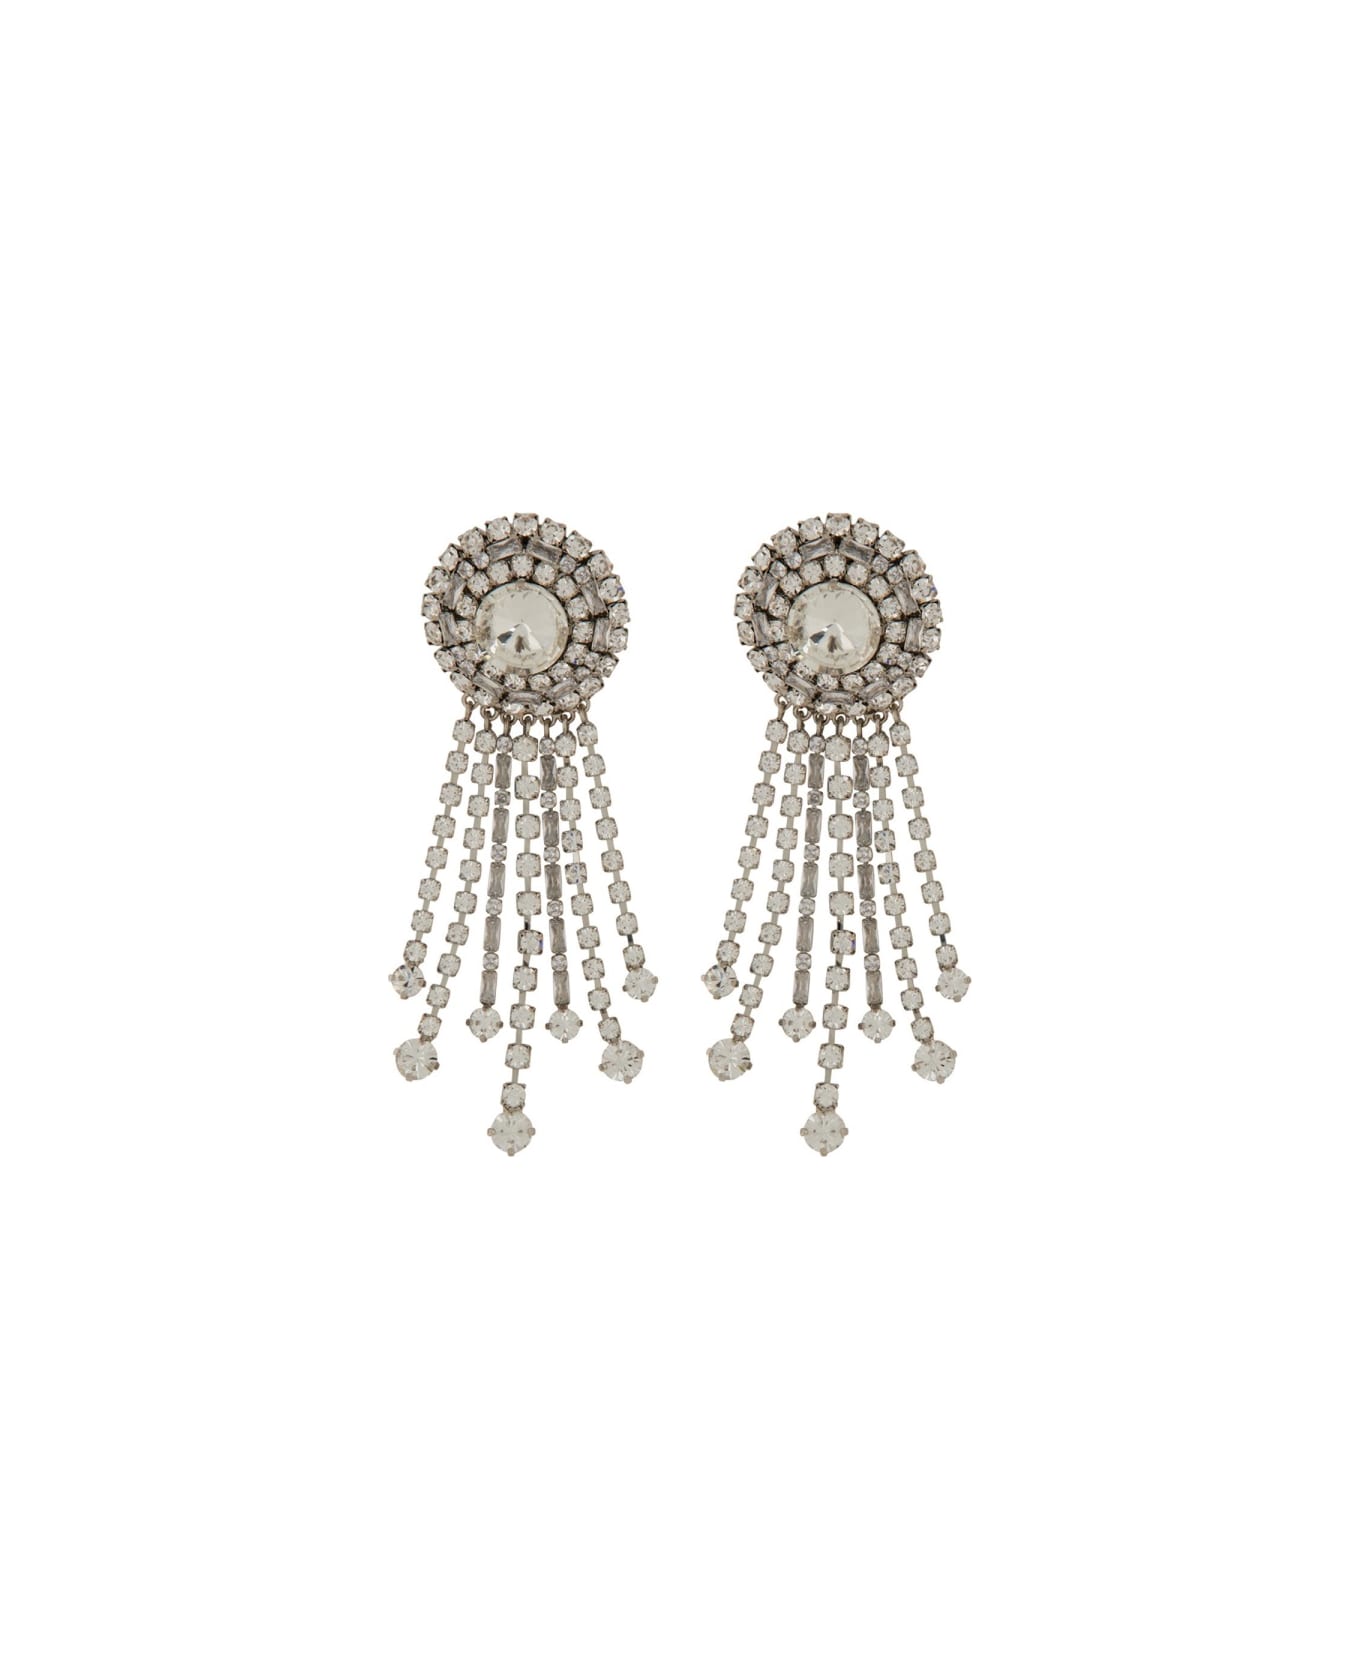 Alessandra Rich Round Clip-on Earrings - SILVER